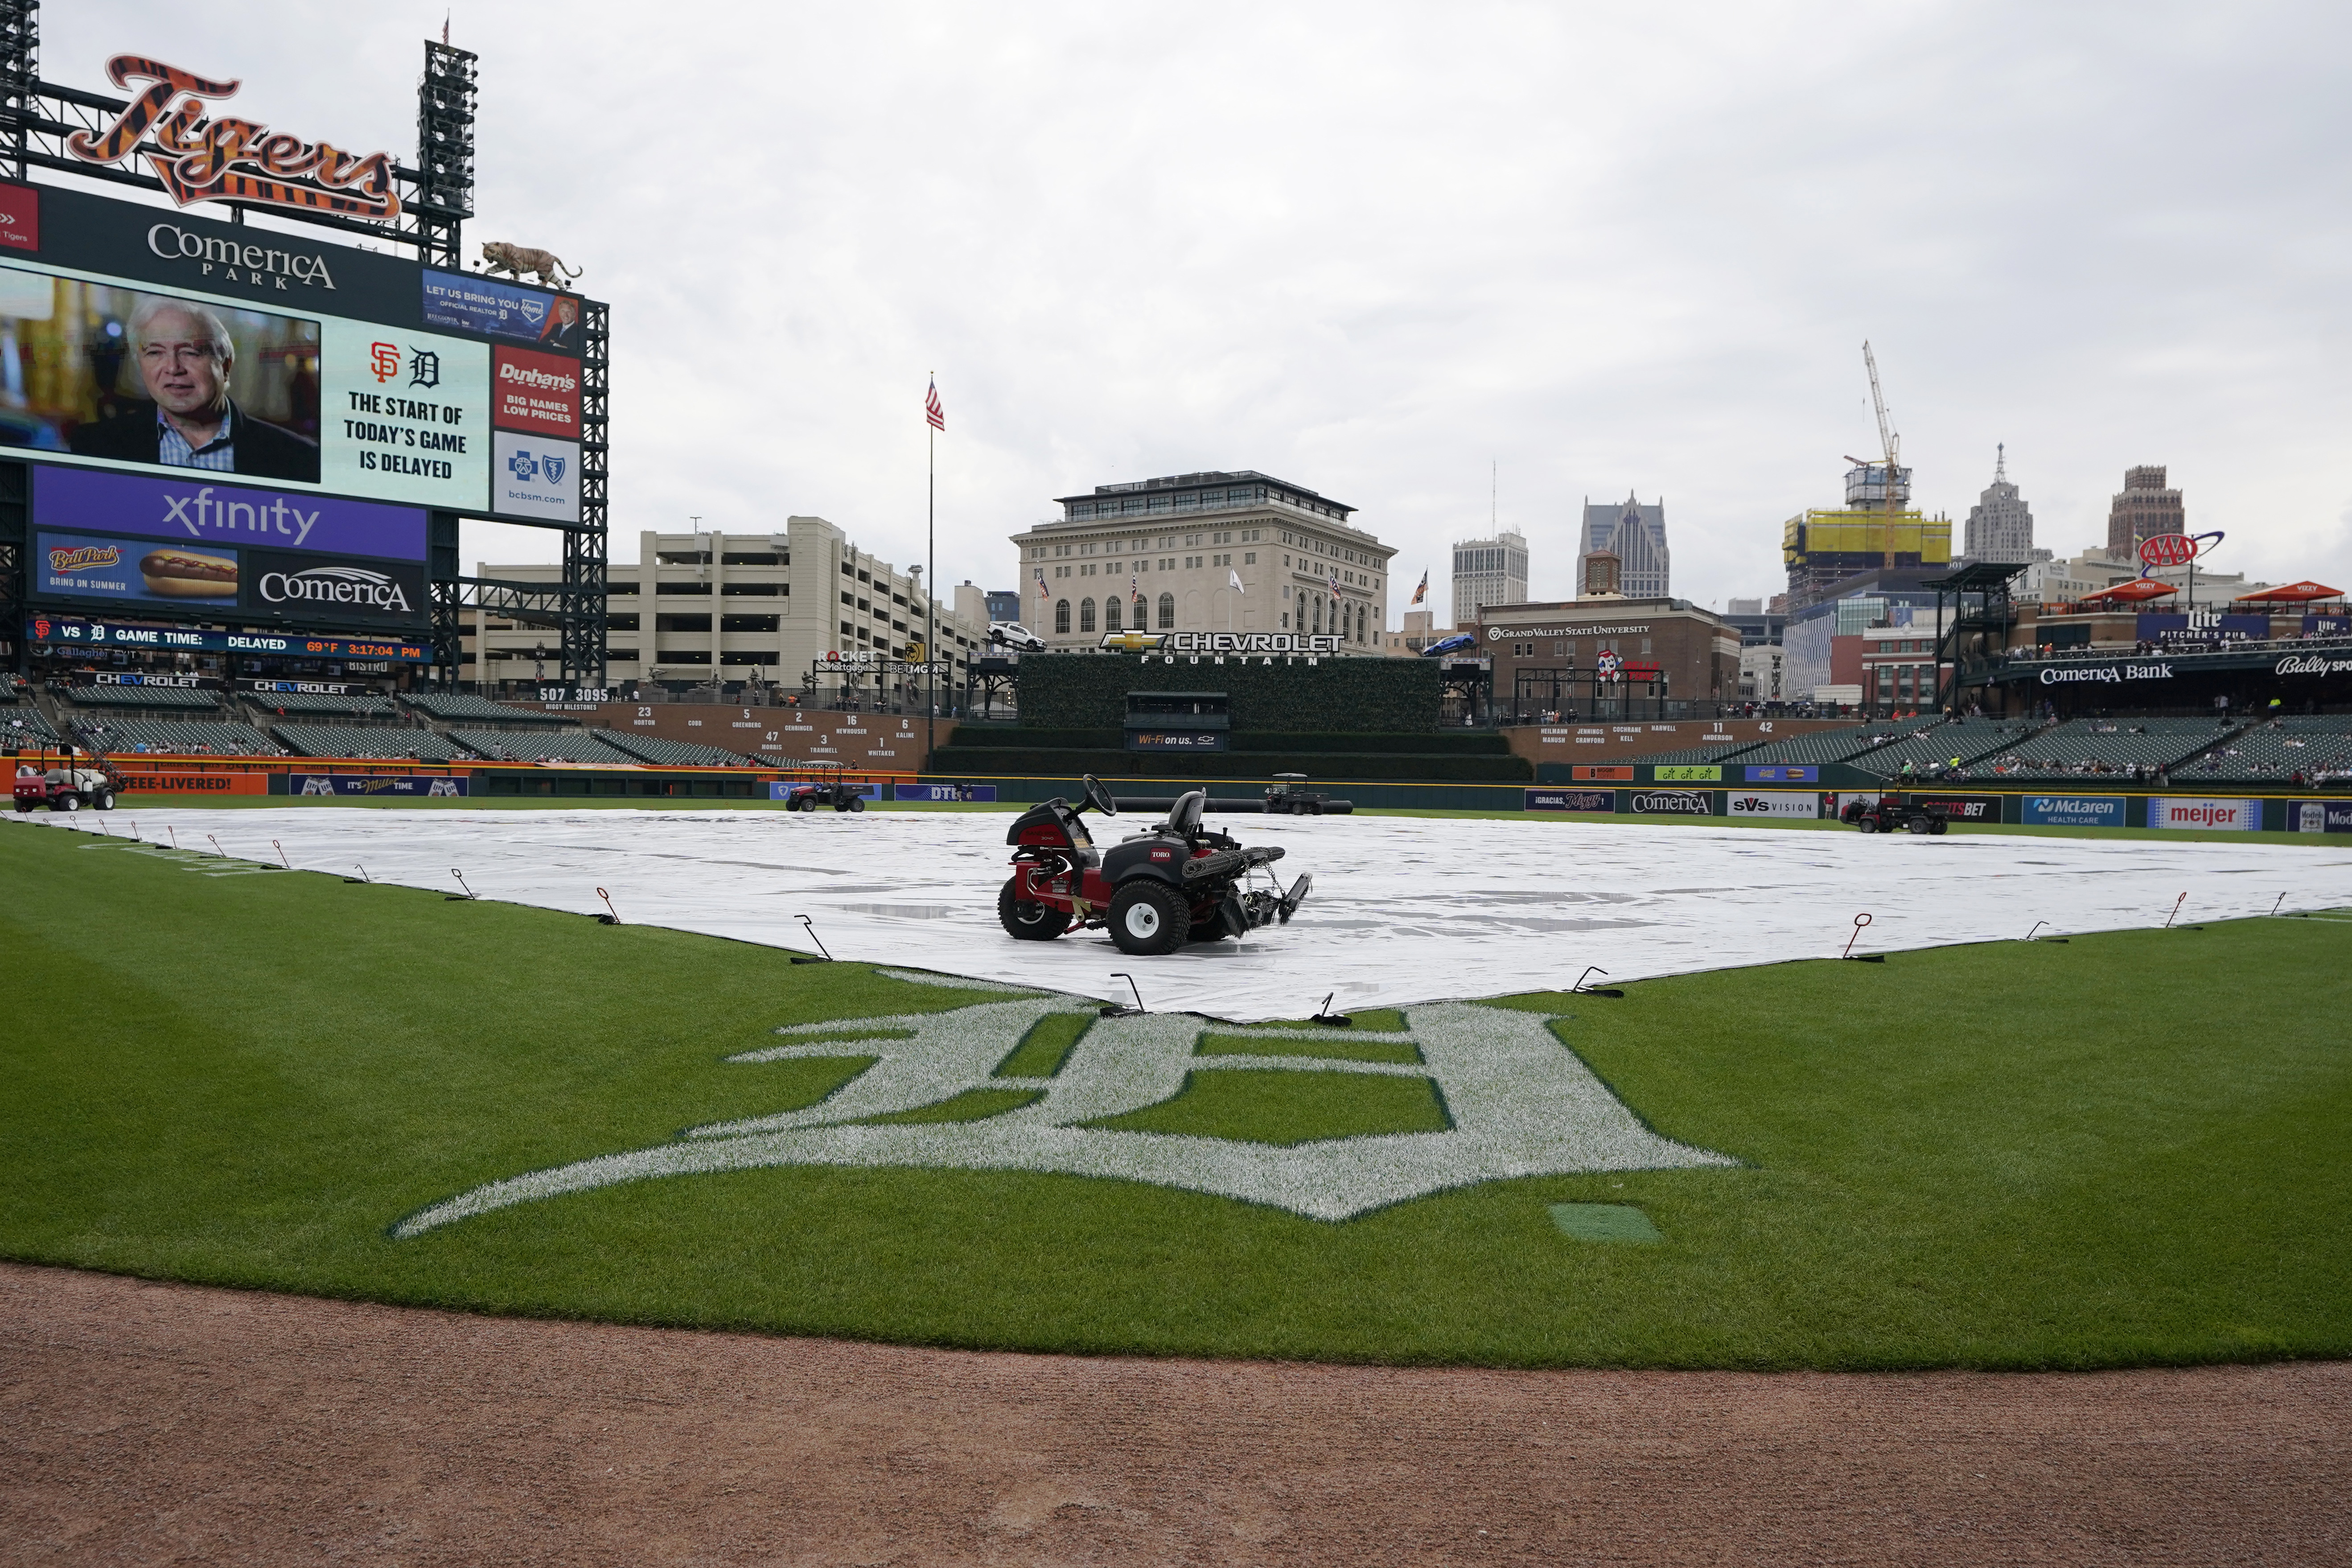 Comerica Park visitor guide: everything you need to know - Bounce